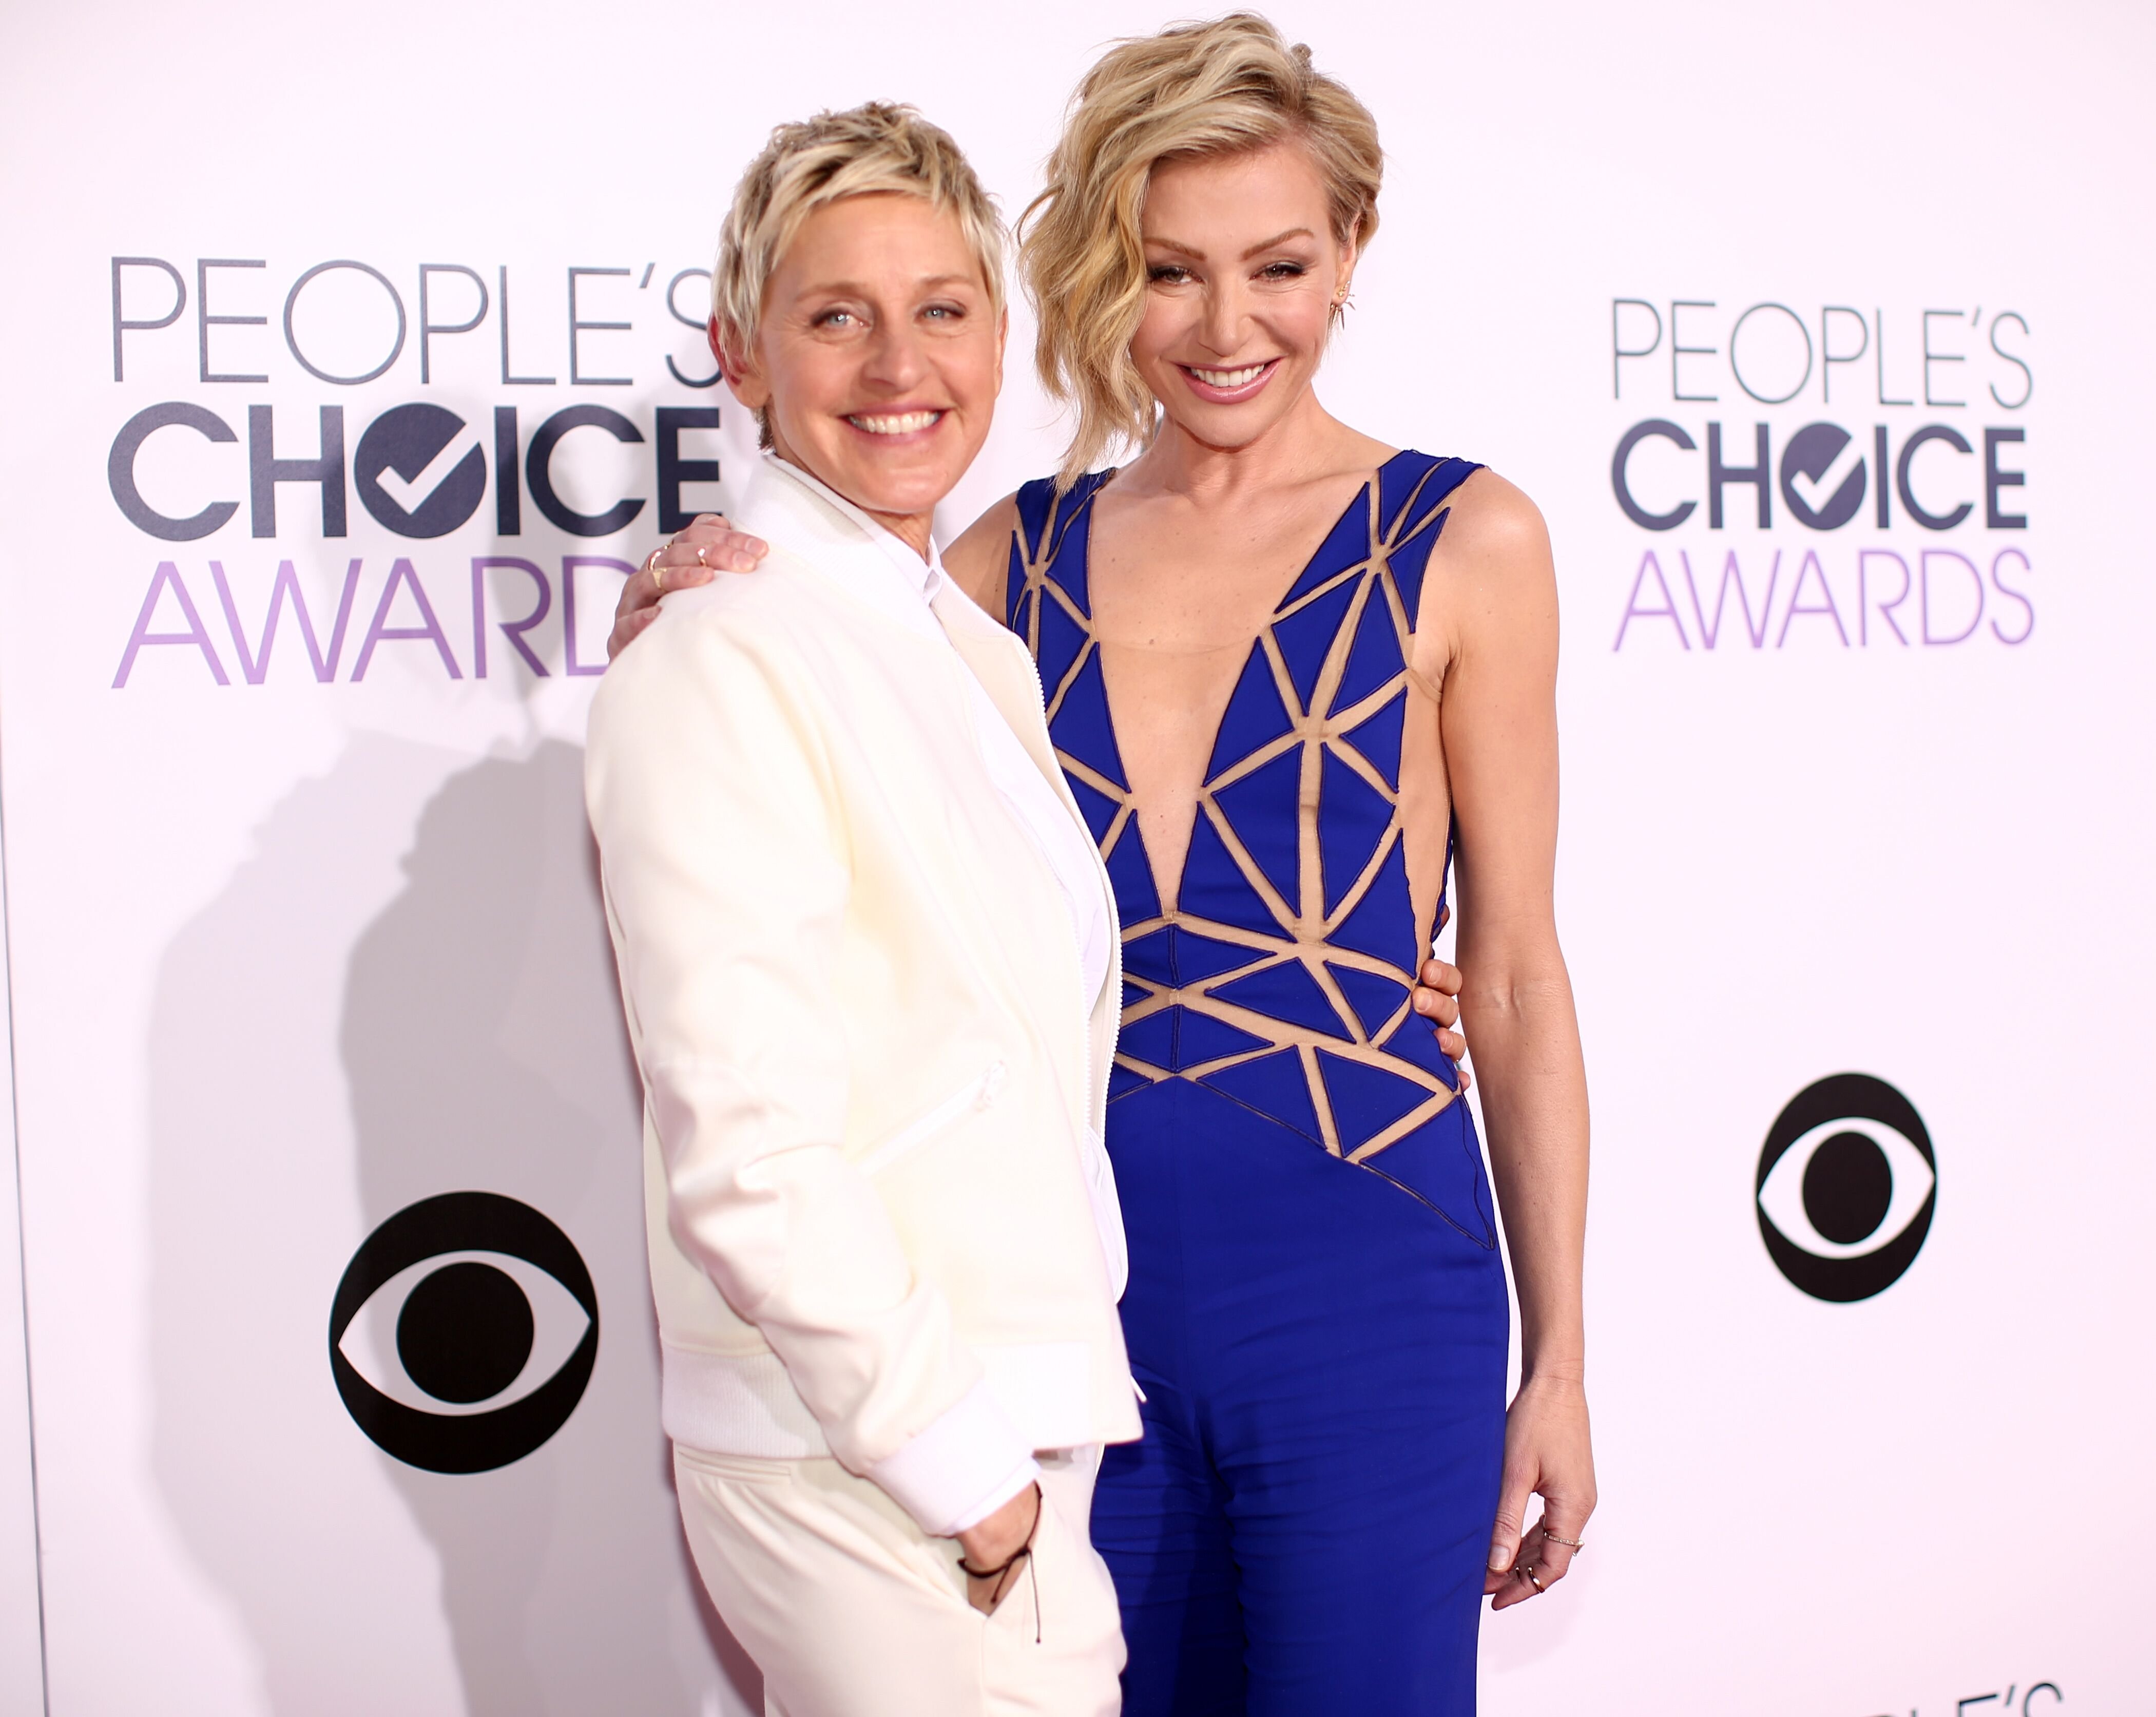 Ellen DeGeneres and Portia de Rossi at the 41st Annual People's Choice Awards in 2015 | Source: Getty Images